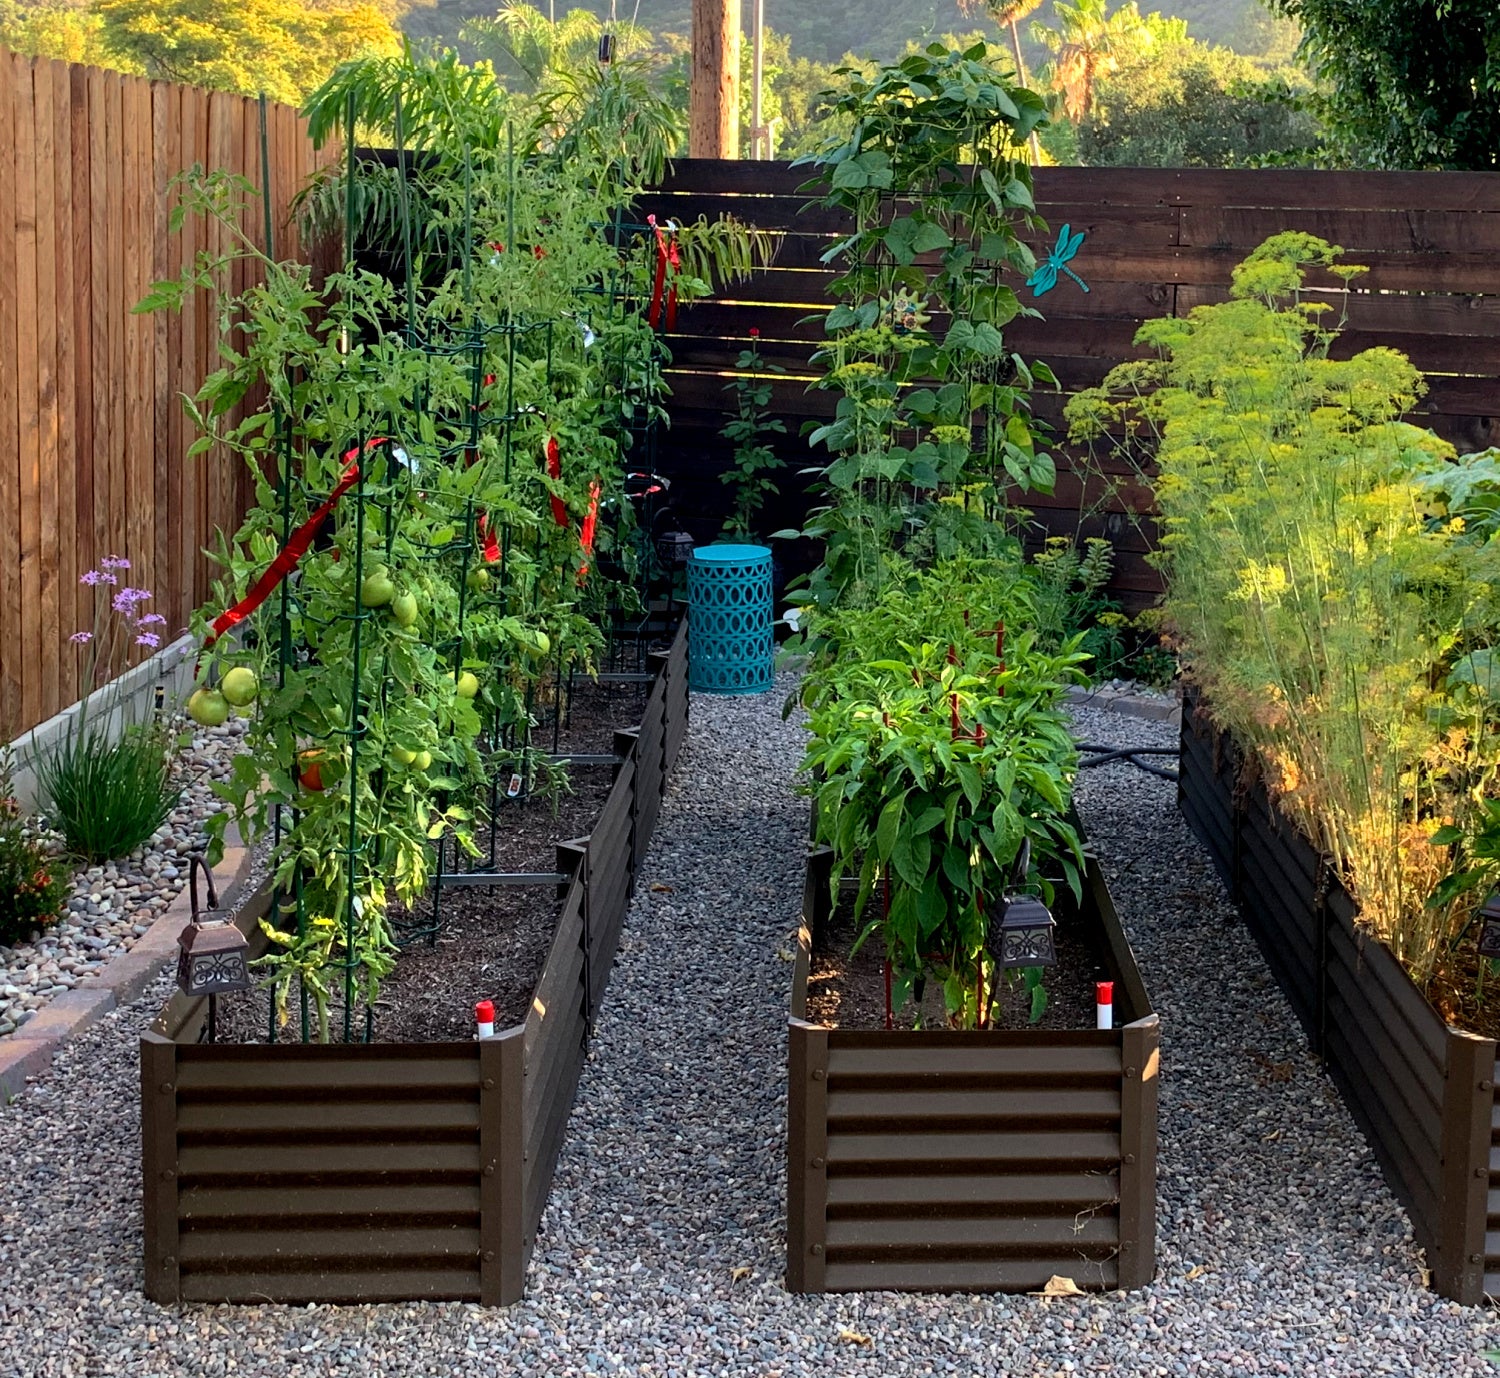 narrow rustic fresa raised garden bed in back corner lot with peppers, tomatoes, fennel